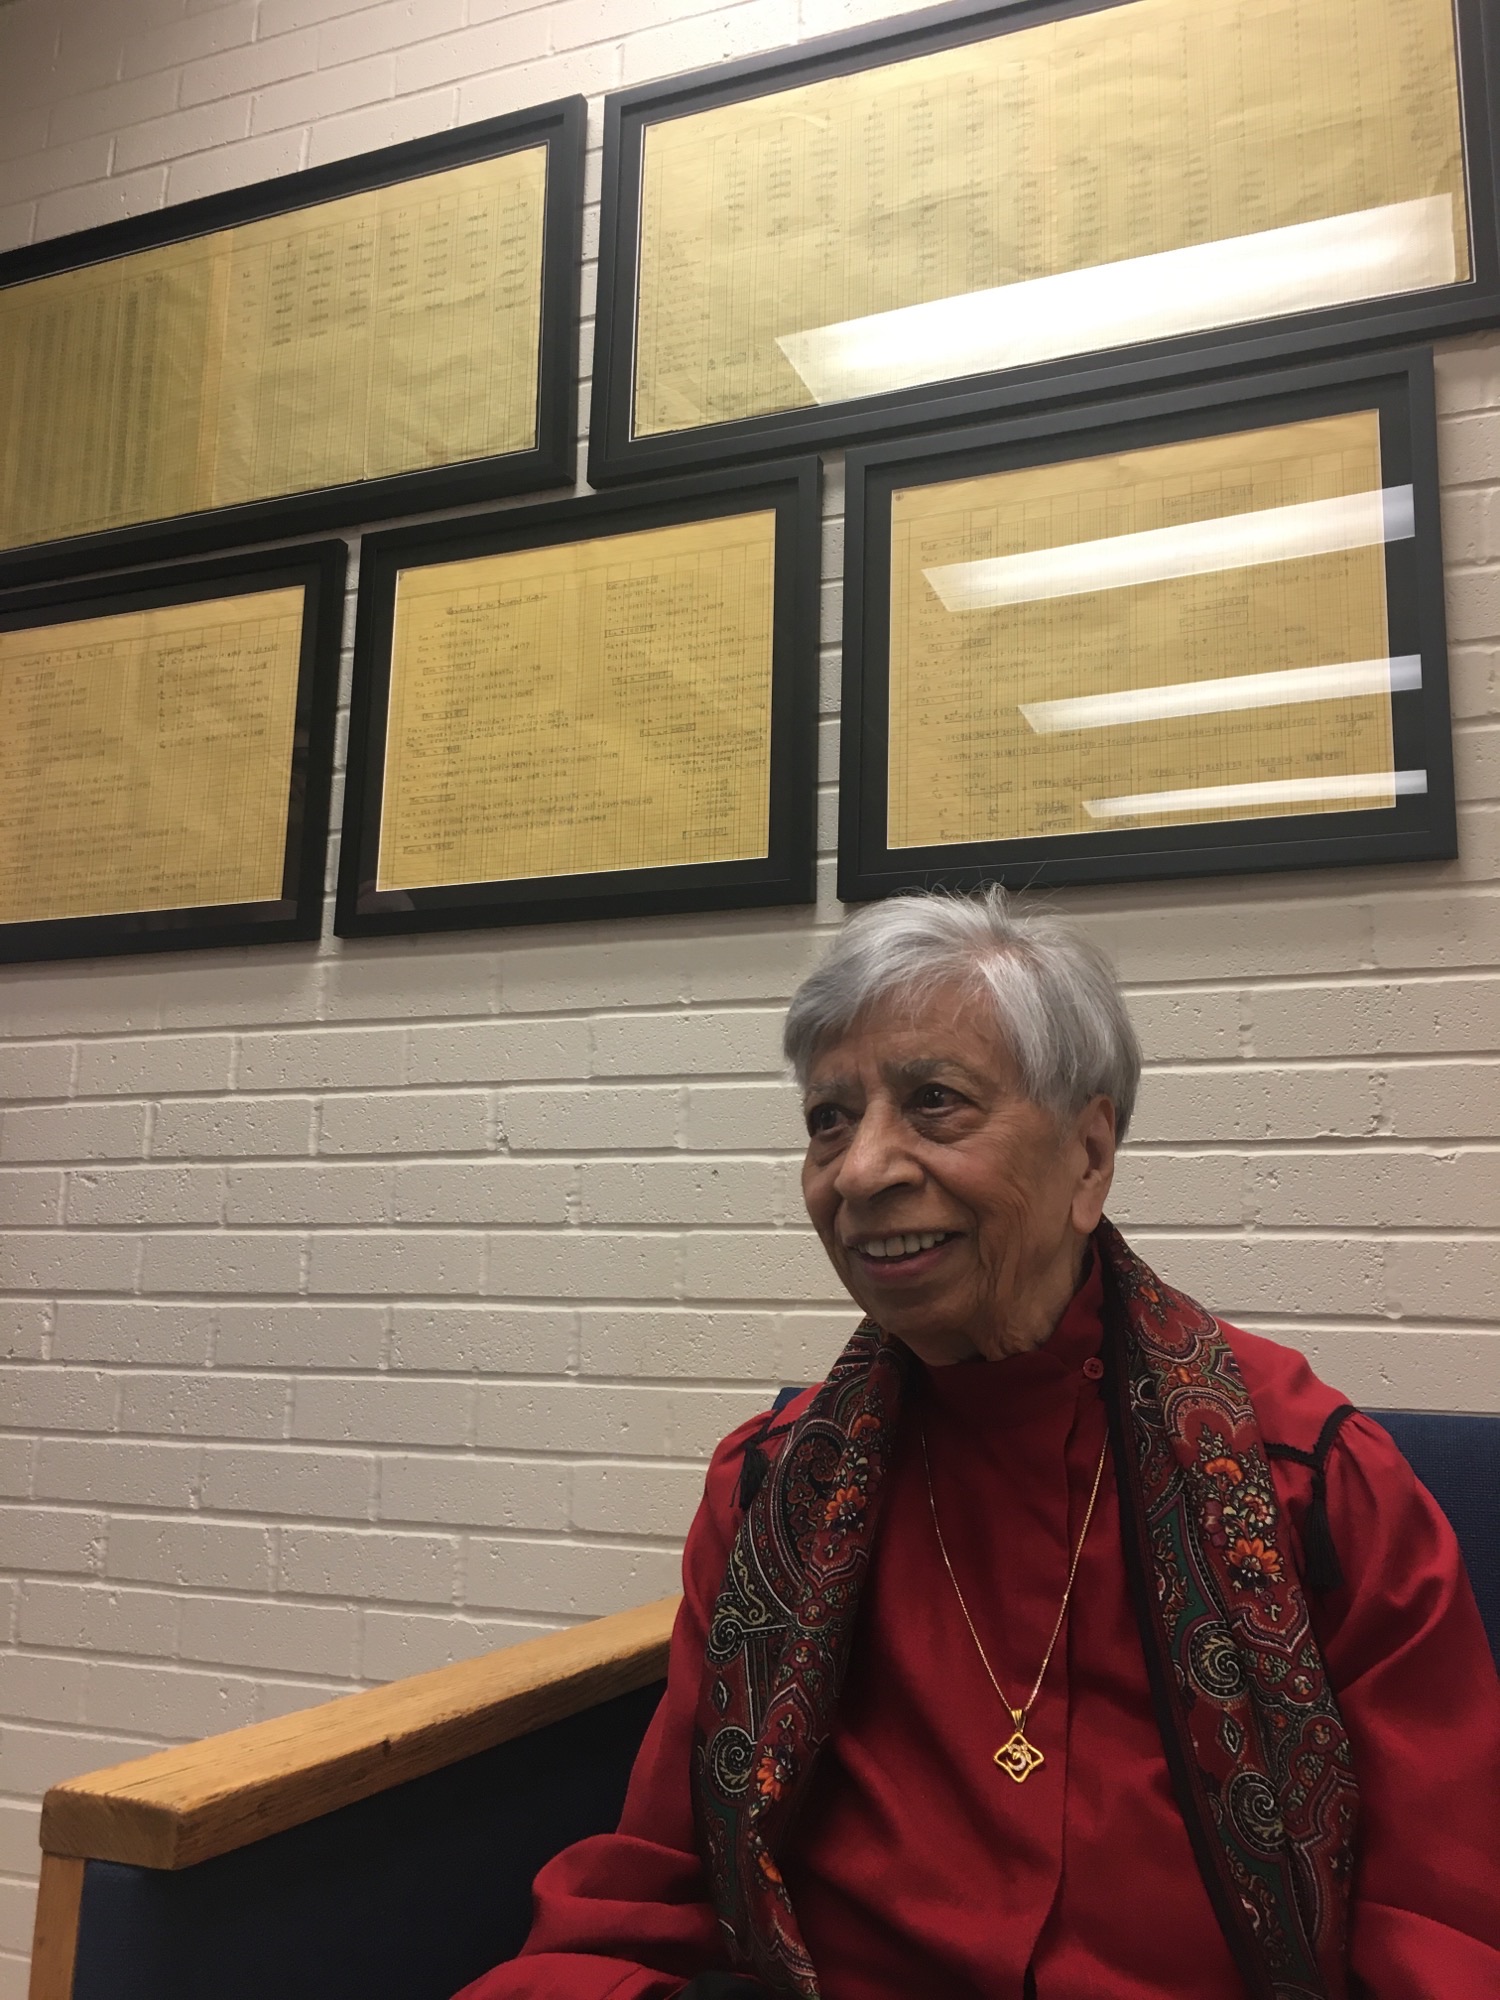 Prof. Kanta Marwah poses in front of her framed equation.